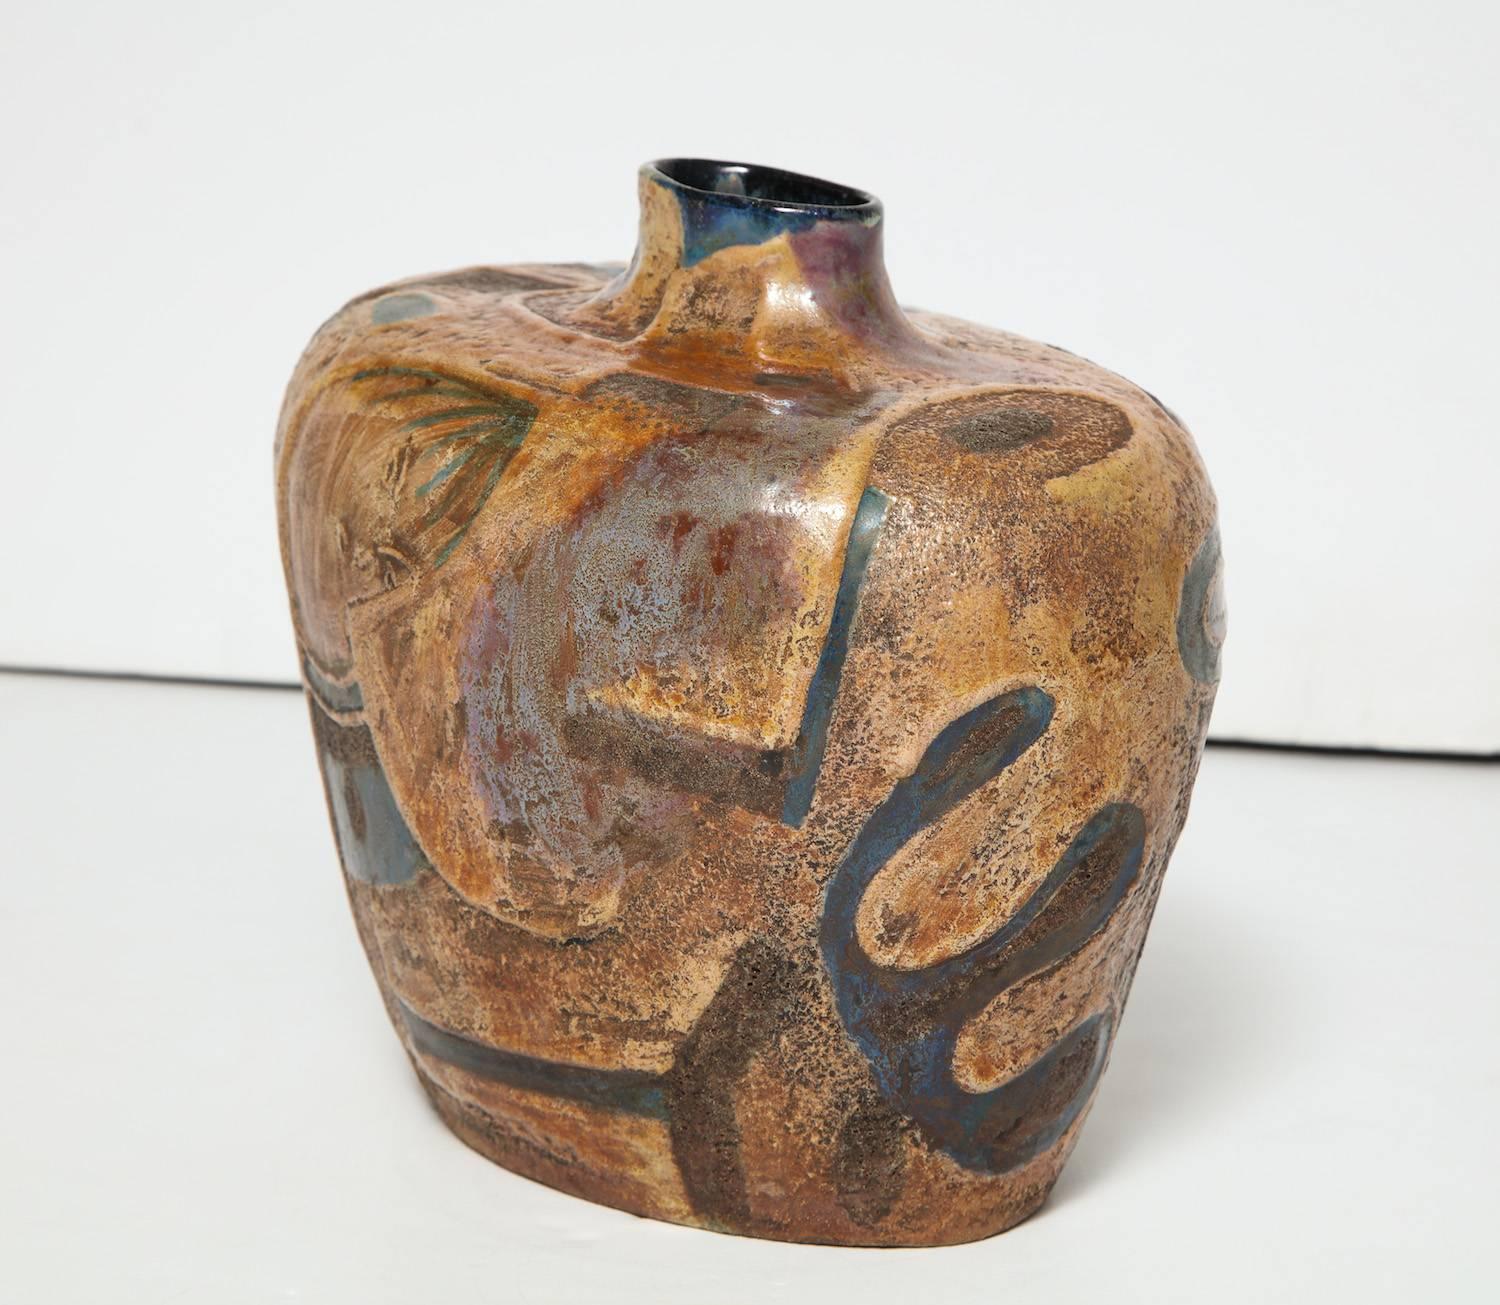 Studio-built vase by Pietro Melandri.
Irregular shaped vase with relief glazes in tans and blues depicting abstract figures. Signed on underside. A similar vase resides in the permanent collection of The International Museum of Ceramics, Faenza,